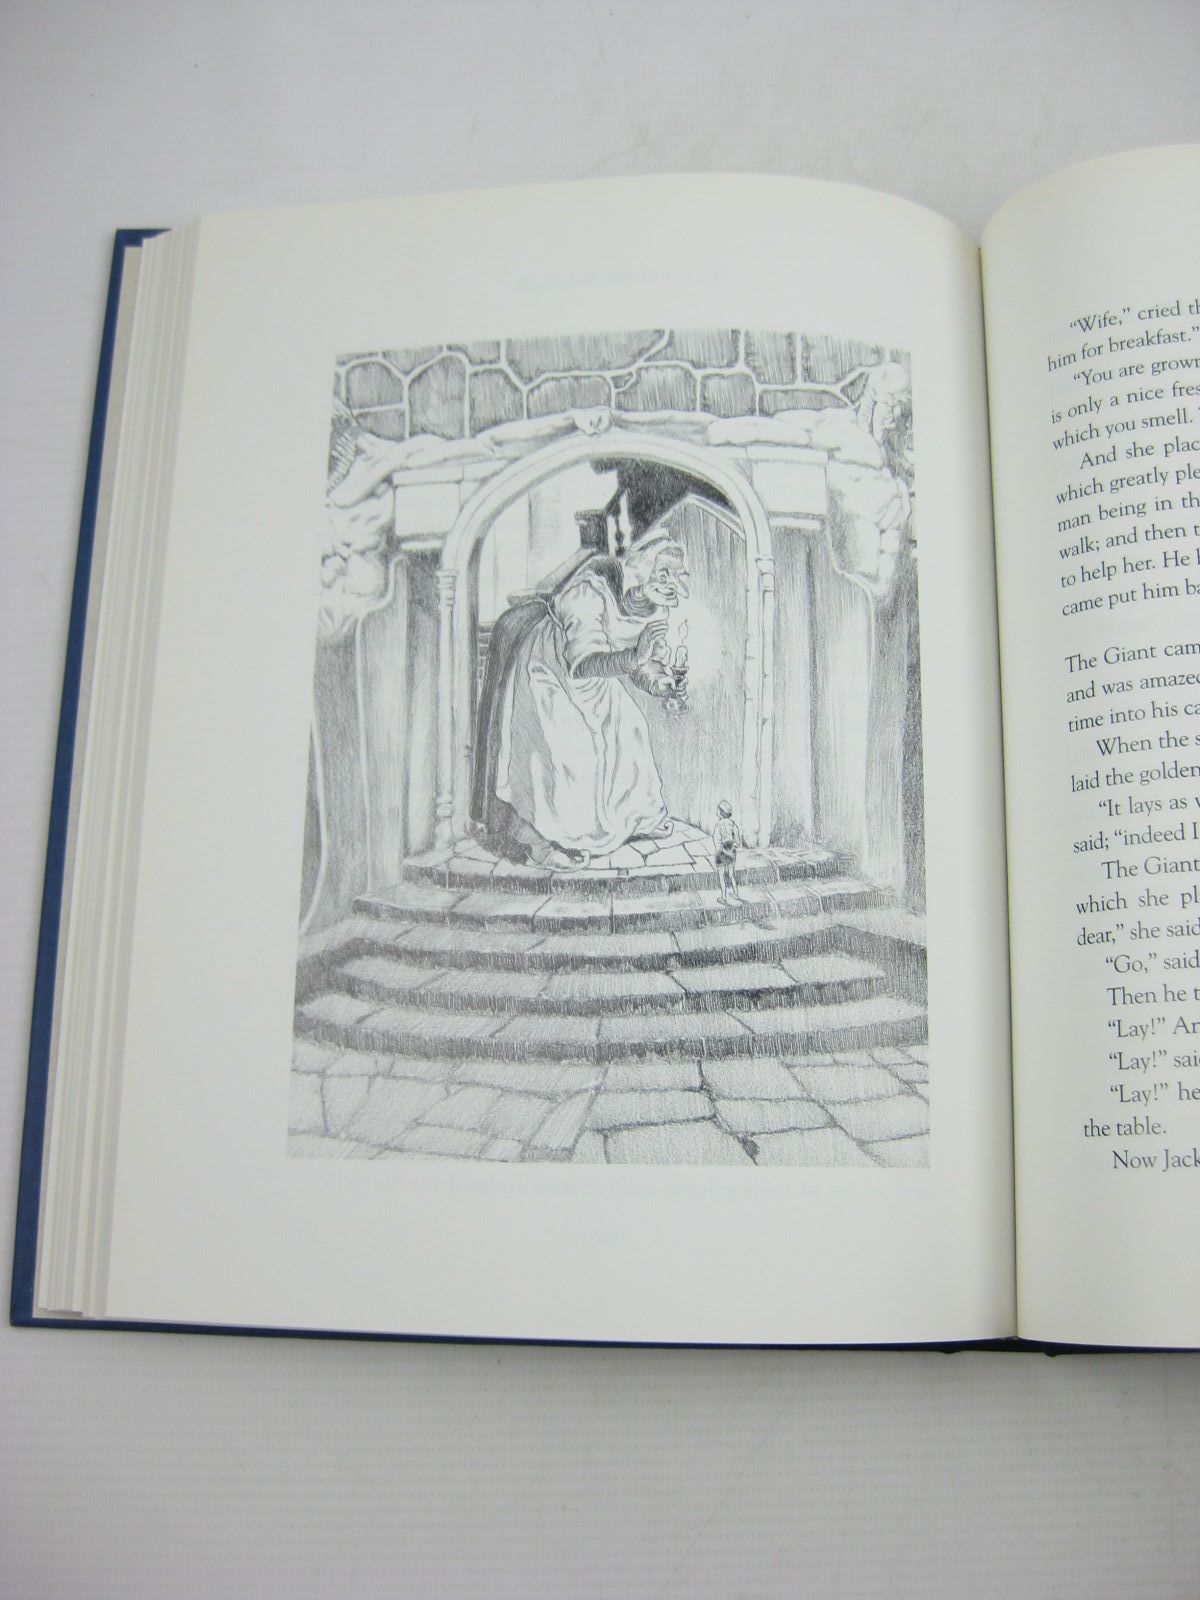 Photo of THE RAINBOW FAIRY BOOK written by Lang, Andrew illustrated by Hague, Michael published by William Morrow & Company Inc (STOCK CODE: 1312710)  for sale by Stella & Rose's Books